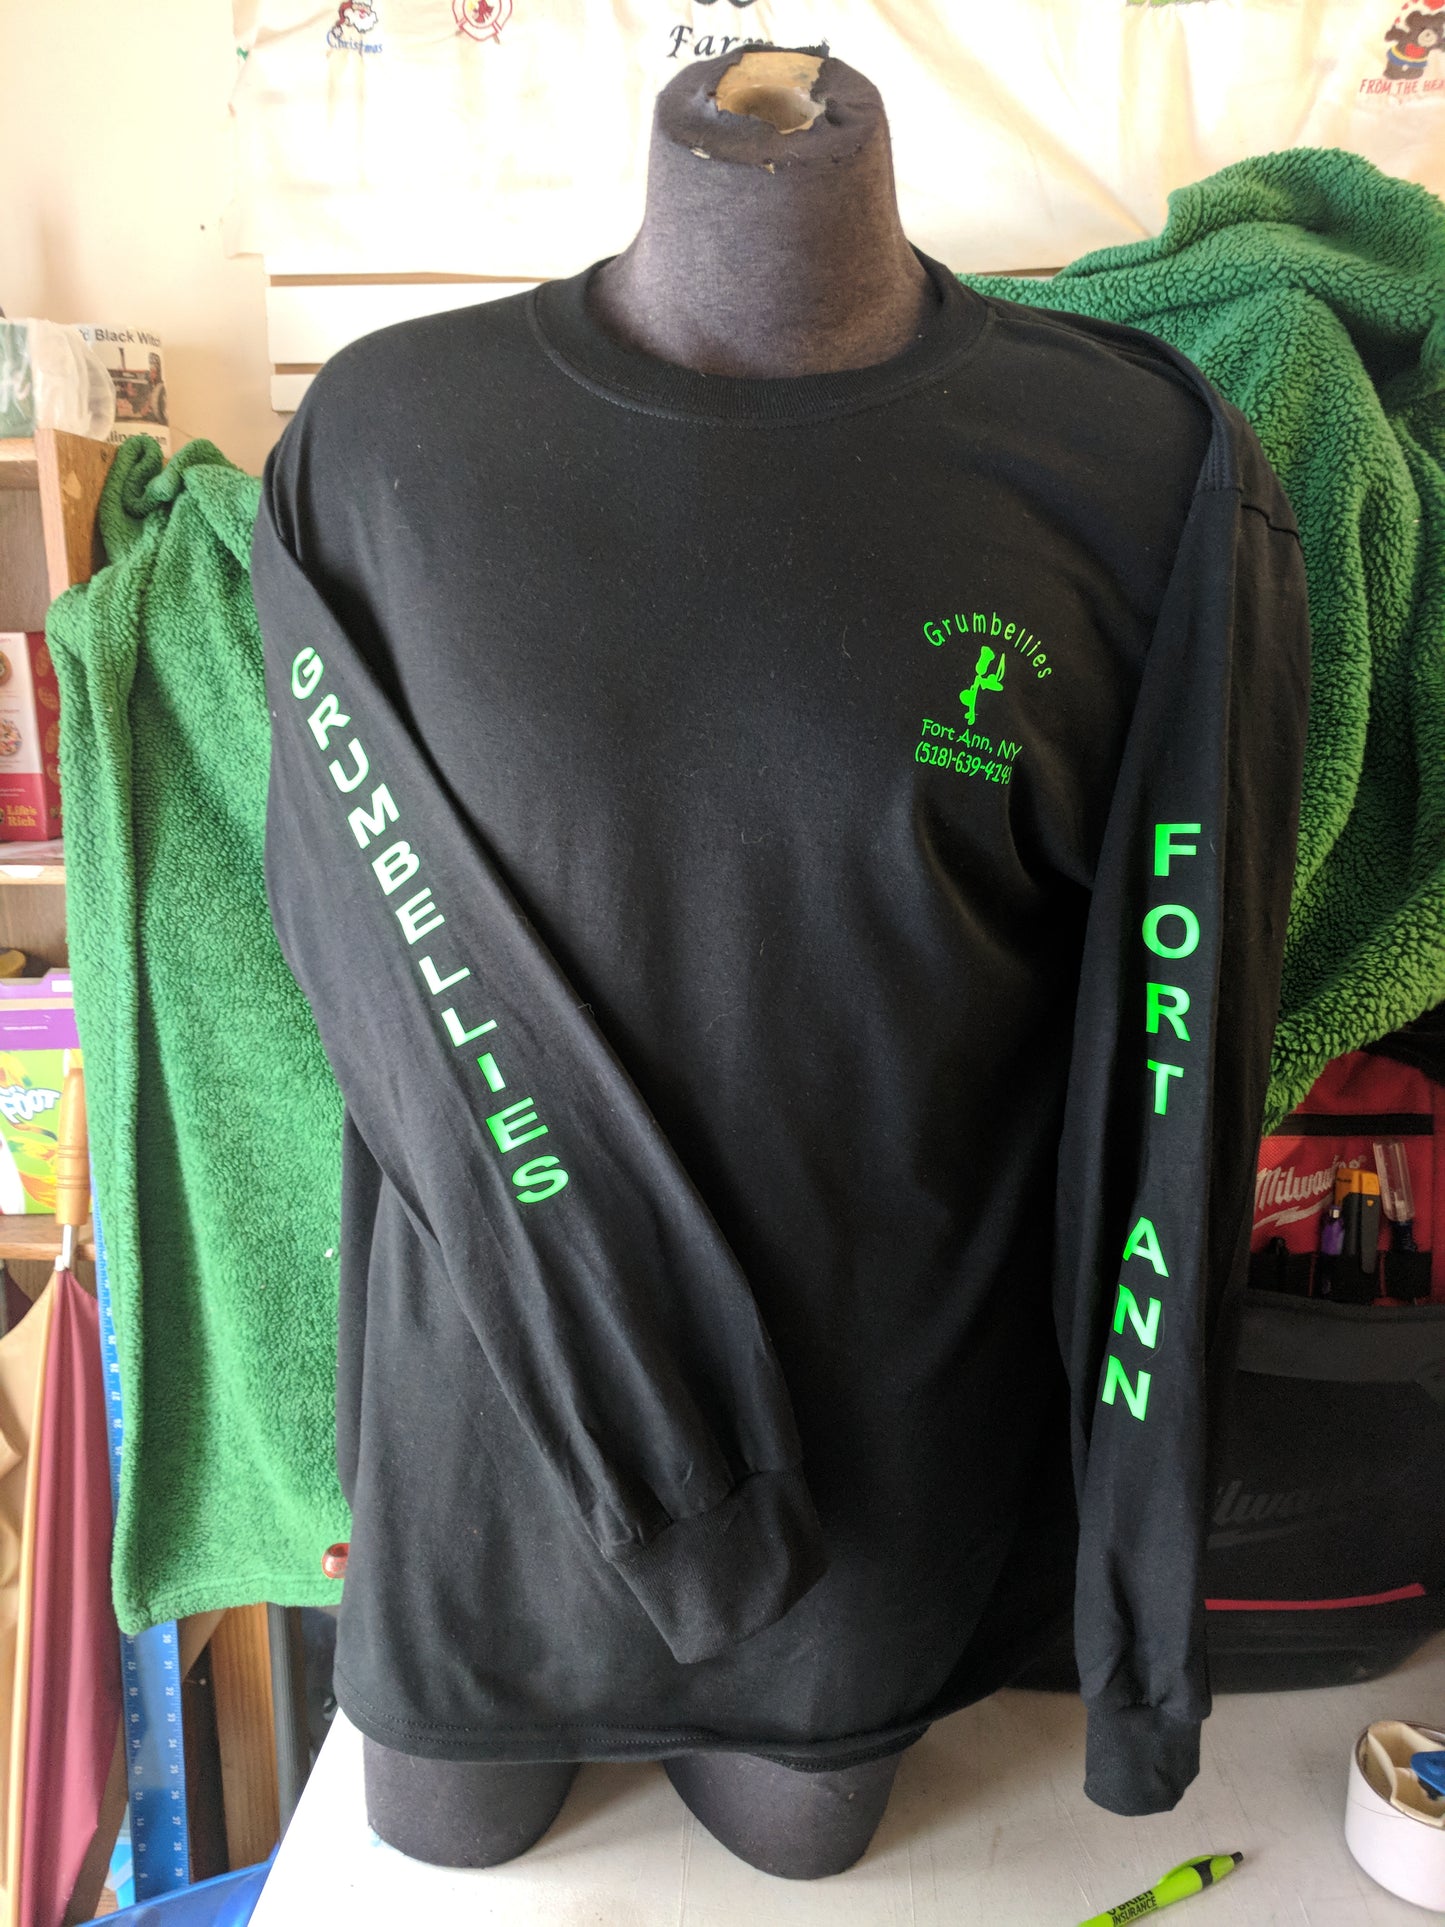 Grumbellies Black Long Sleeve with Neon Green Lettering